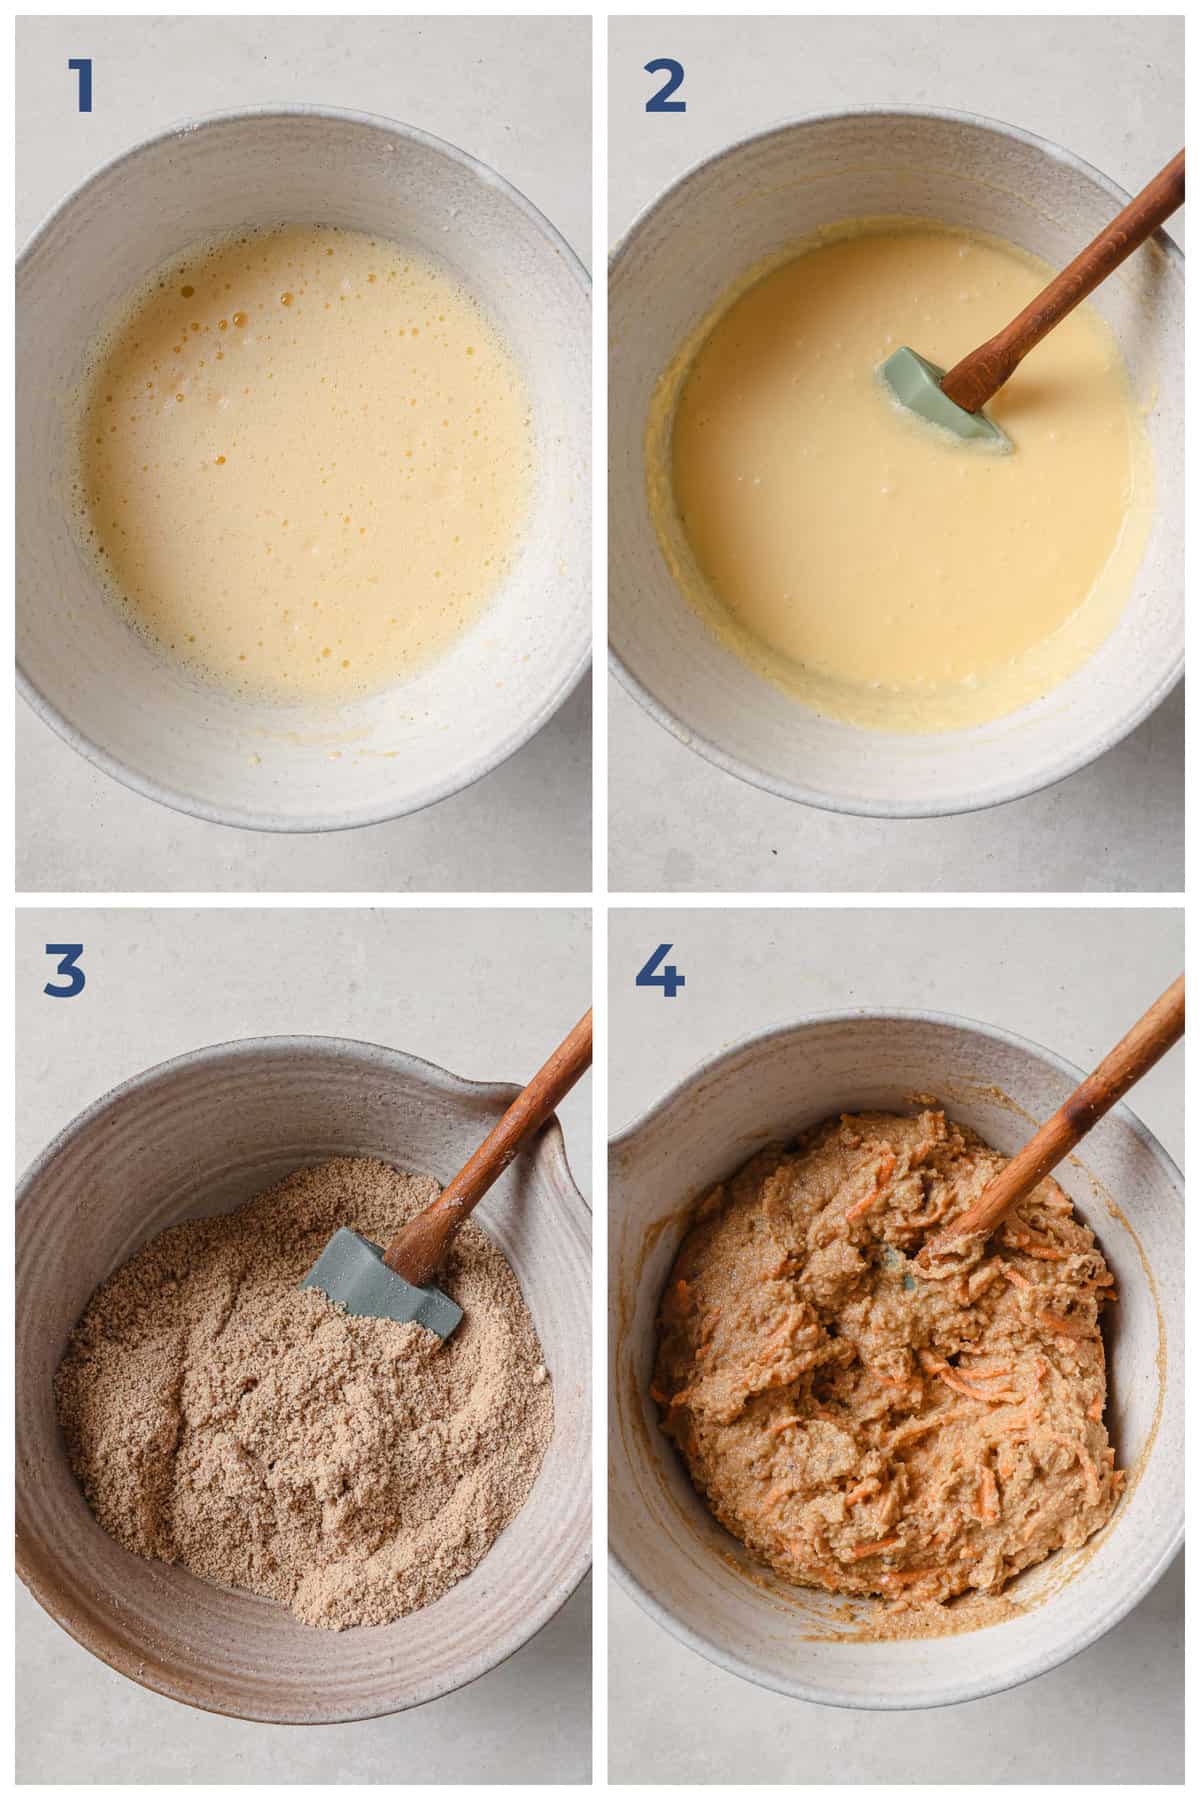 Step by step photo instructions for how to make a low carb and gluten free carrot cake.